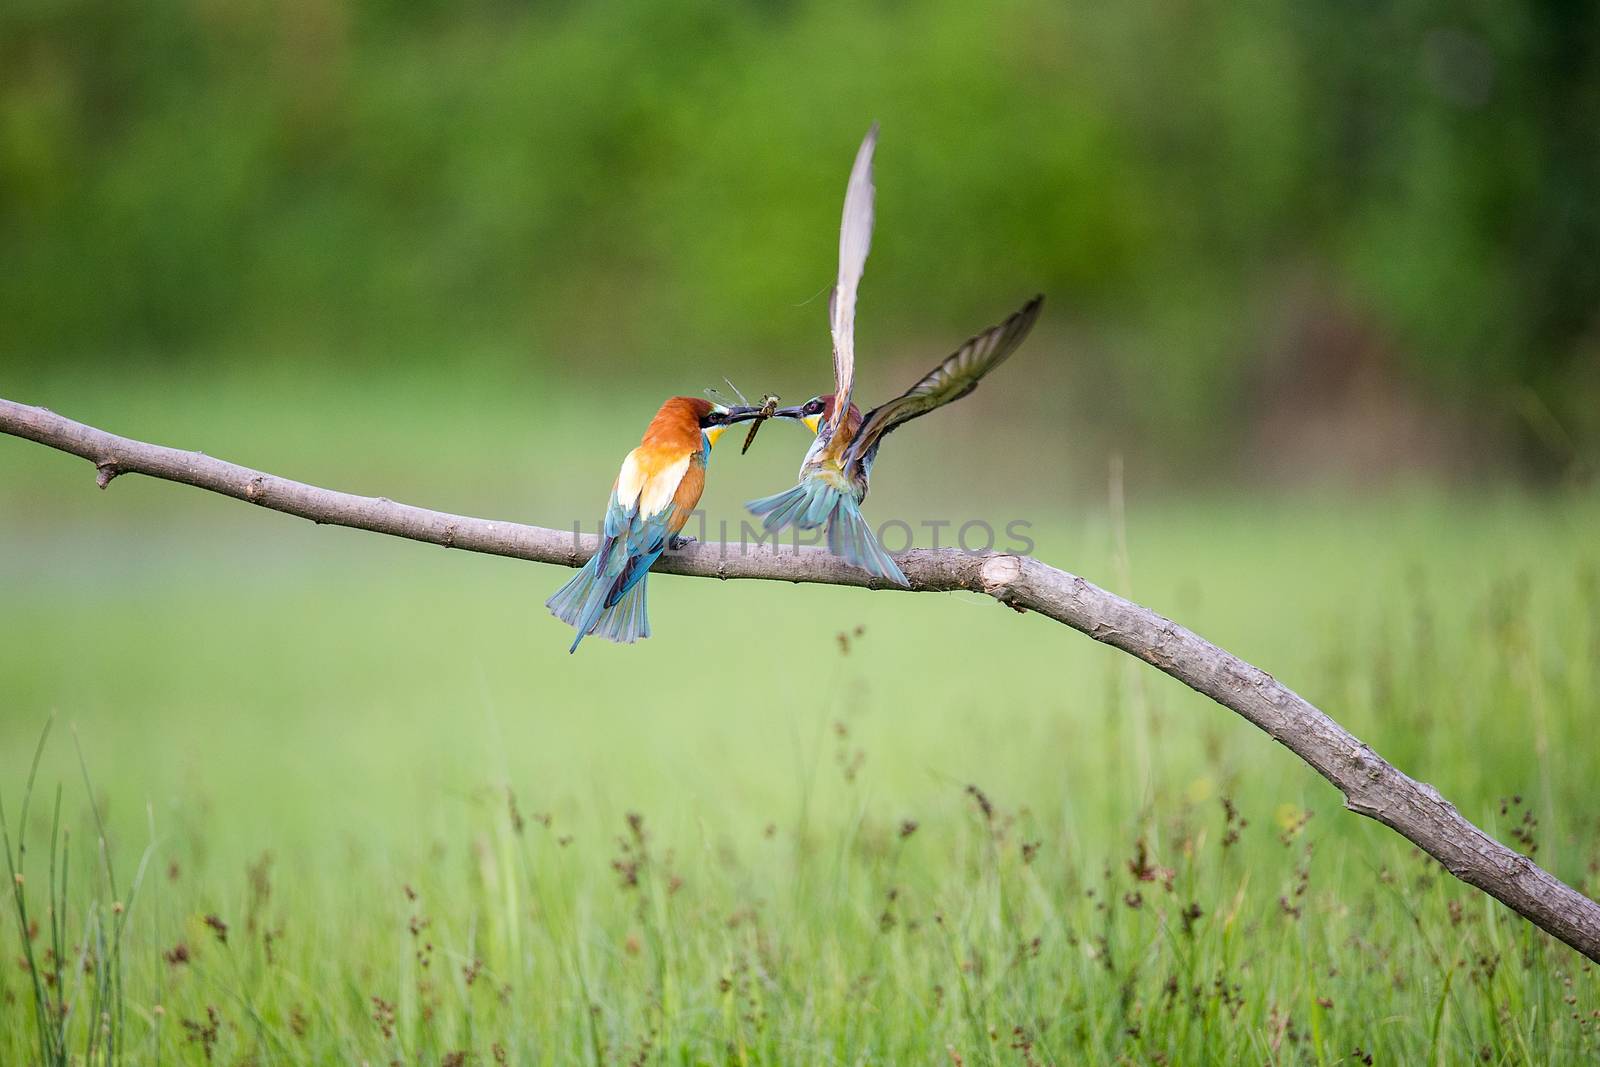 European Bee-eater courtship (Merops apiaster) - male with dragonfly for female by Tanja_g